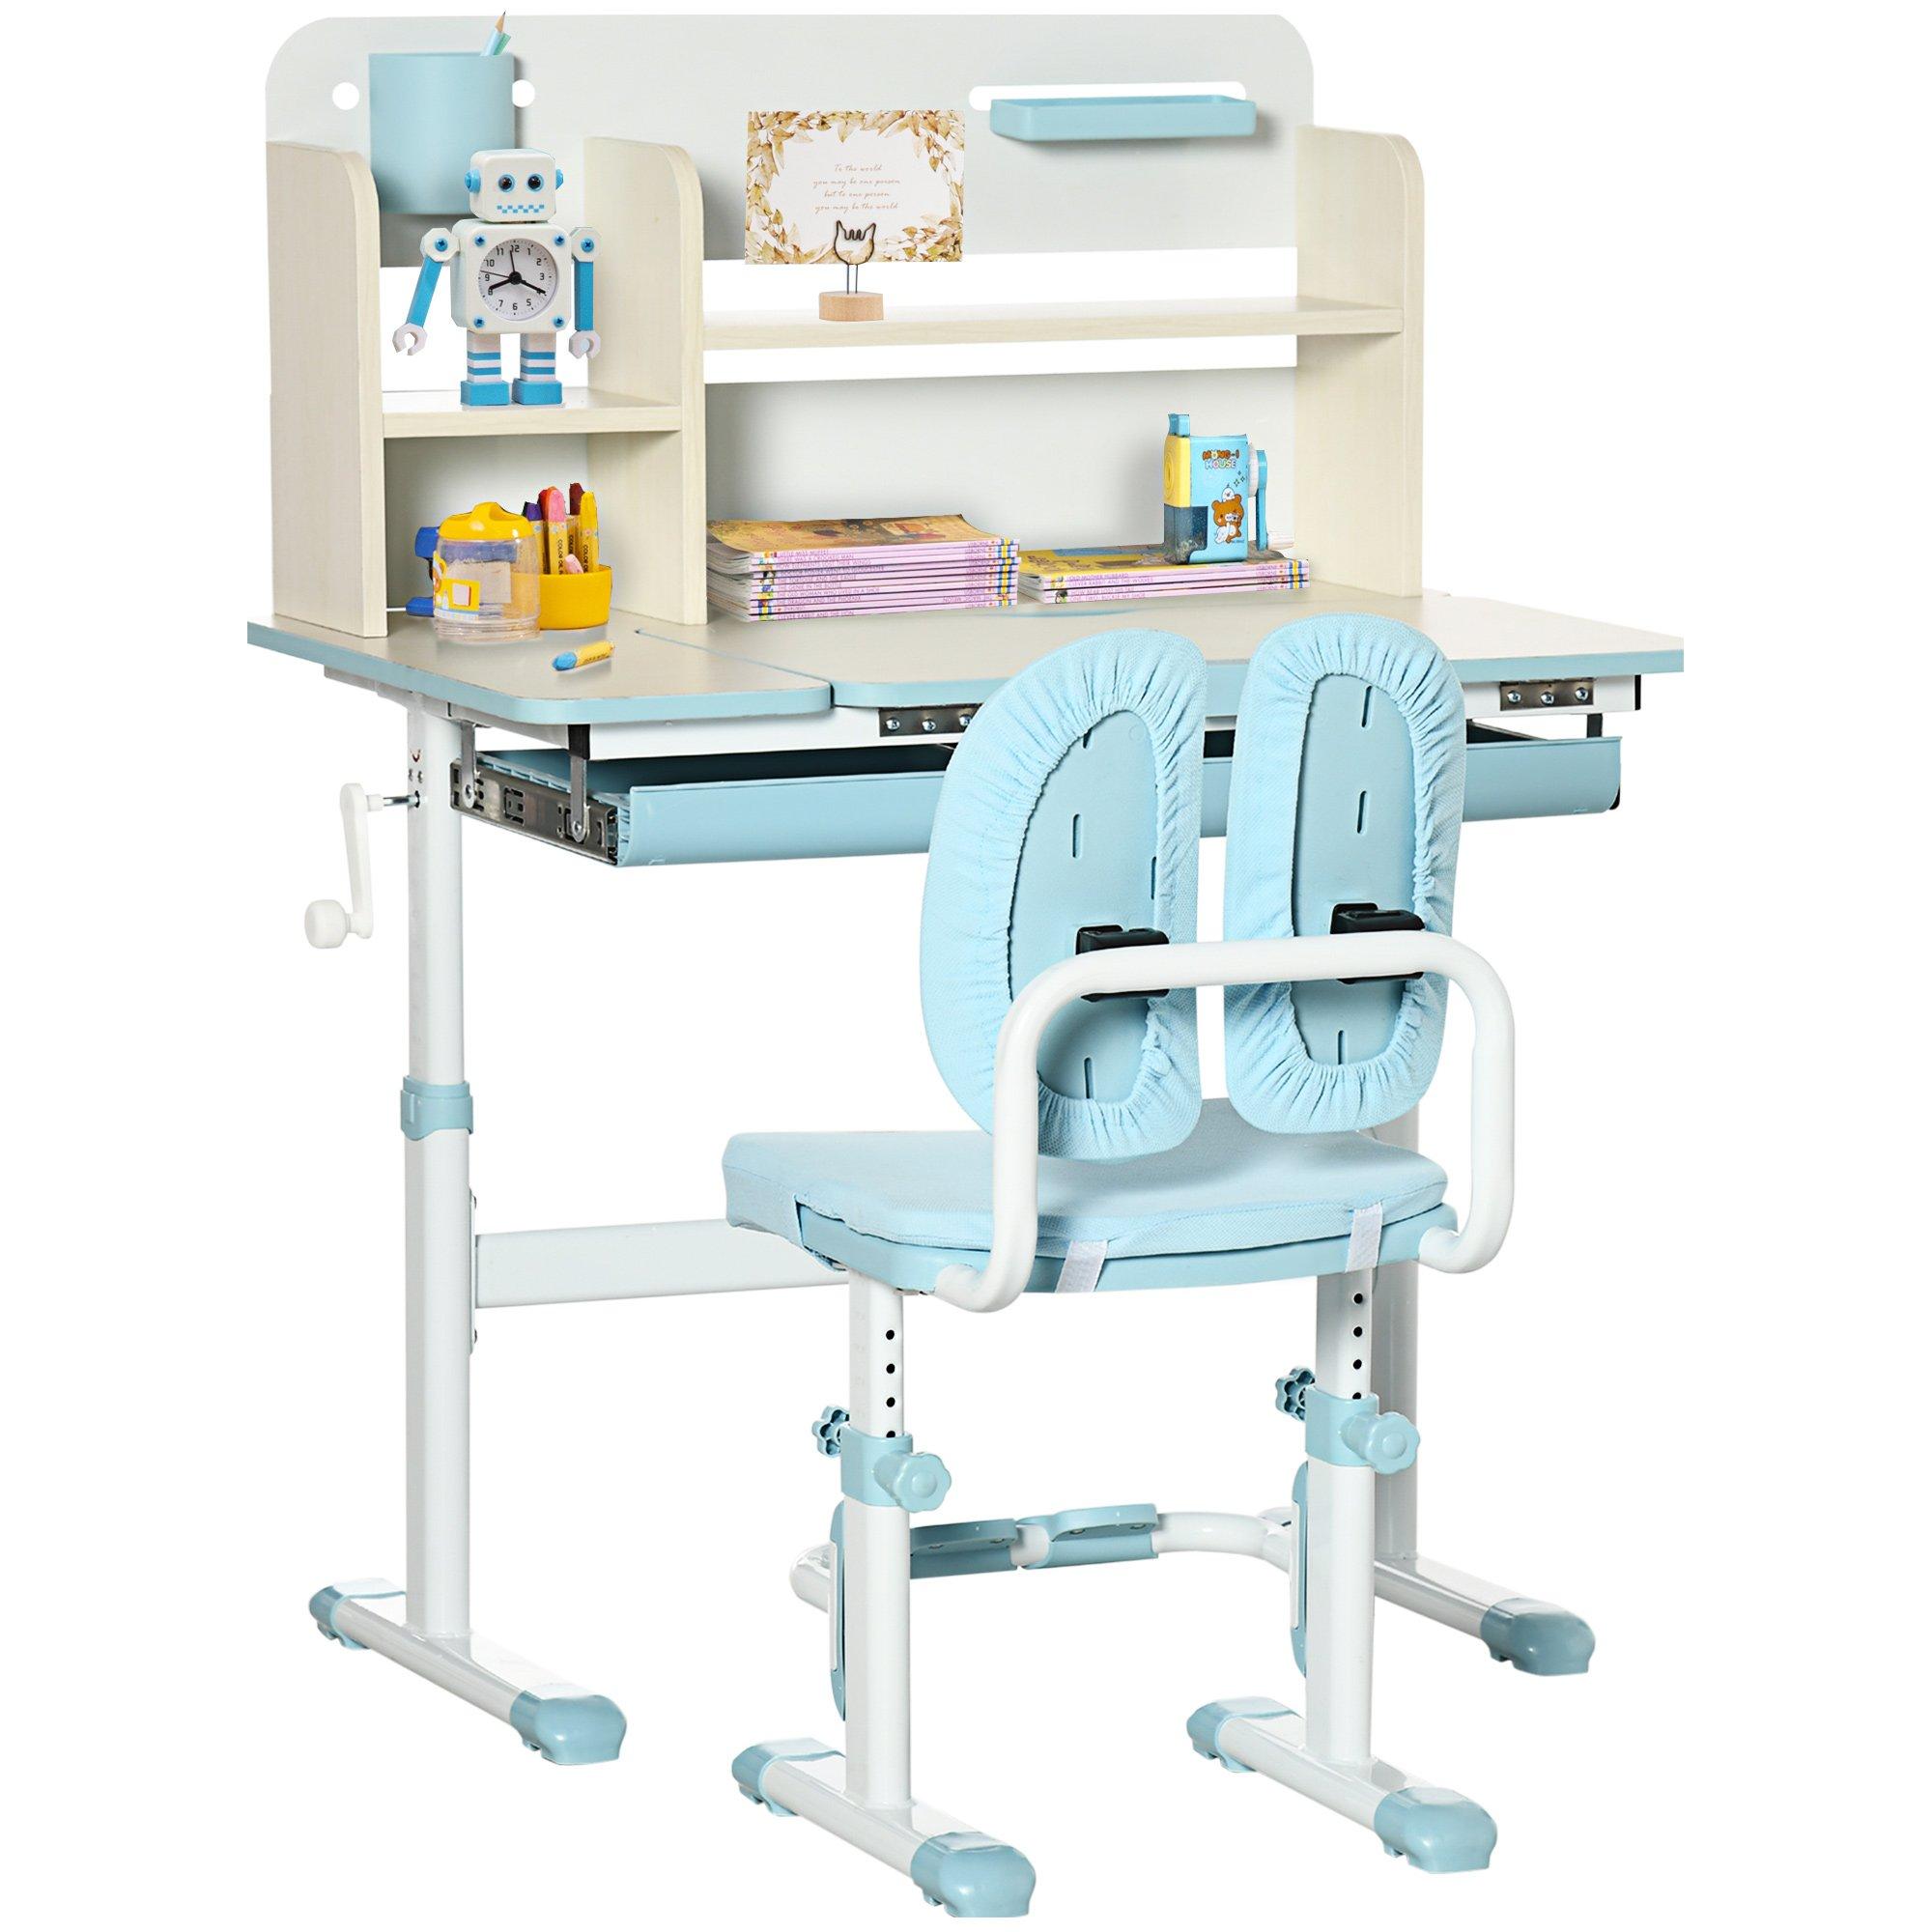 Height Adjustable Kids Desk and Chair Set, for Ages 3-12 Years